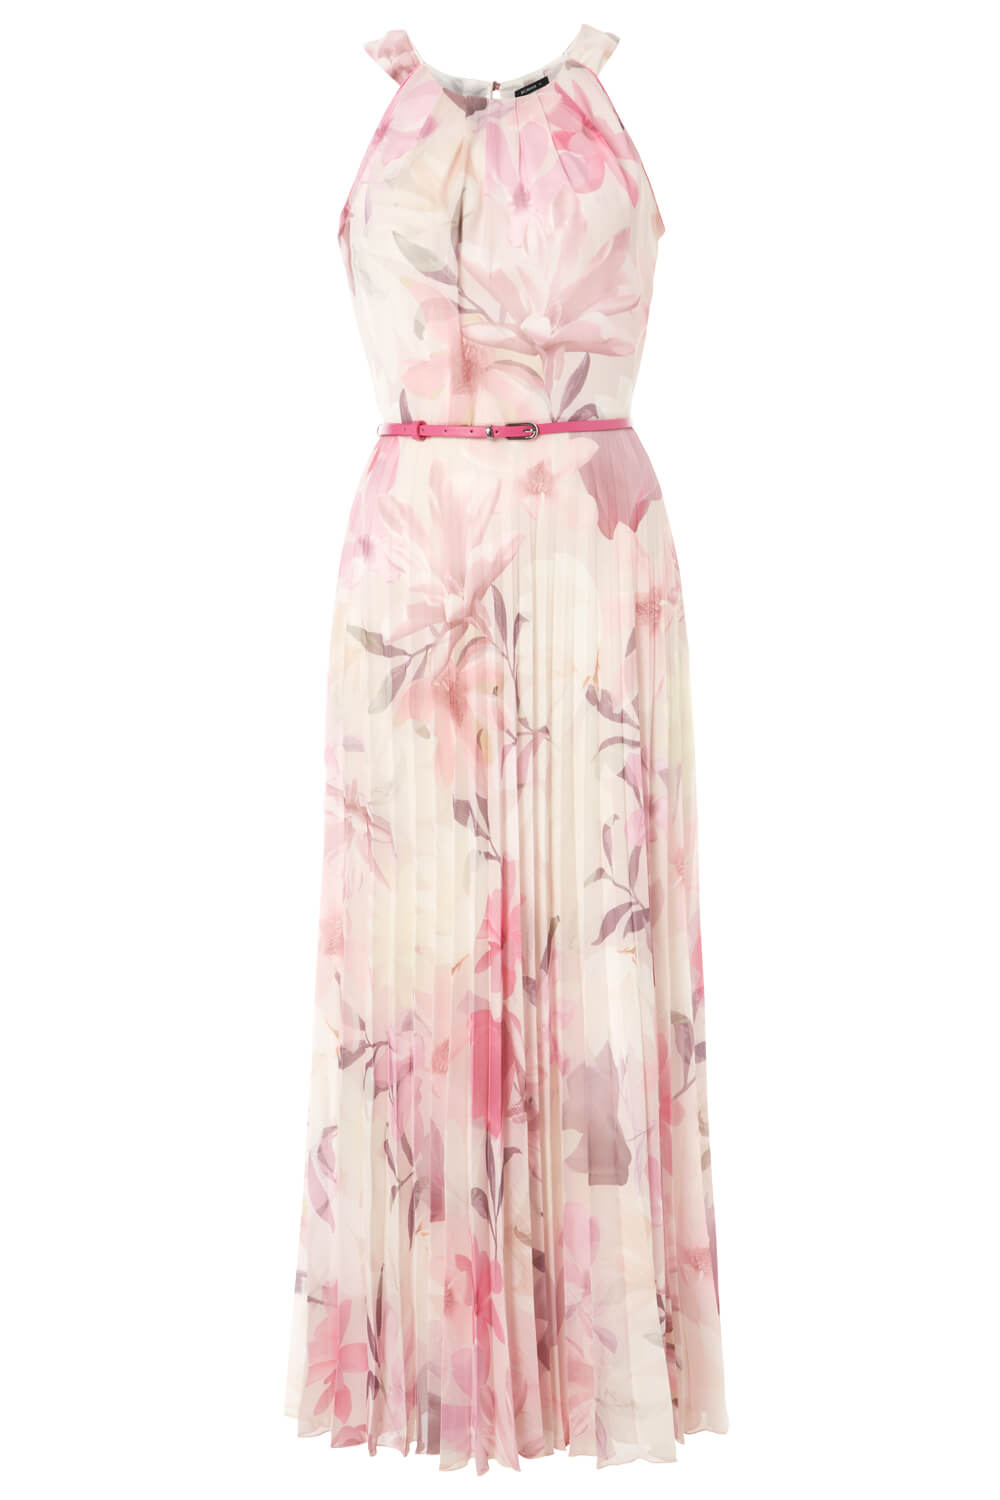 PINK Floral Pleated Maxi Dress, Image 5 of 5